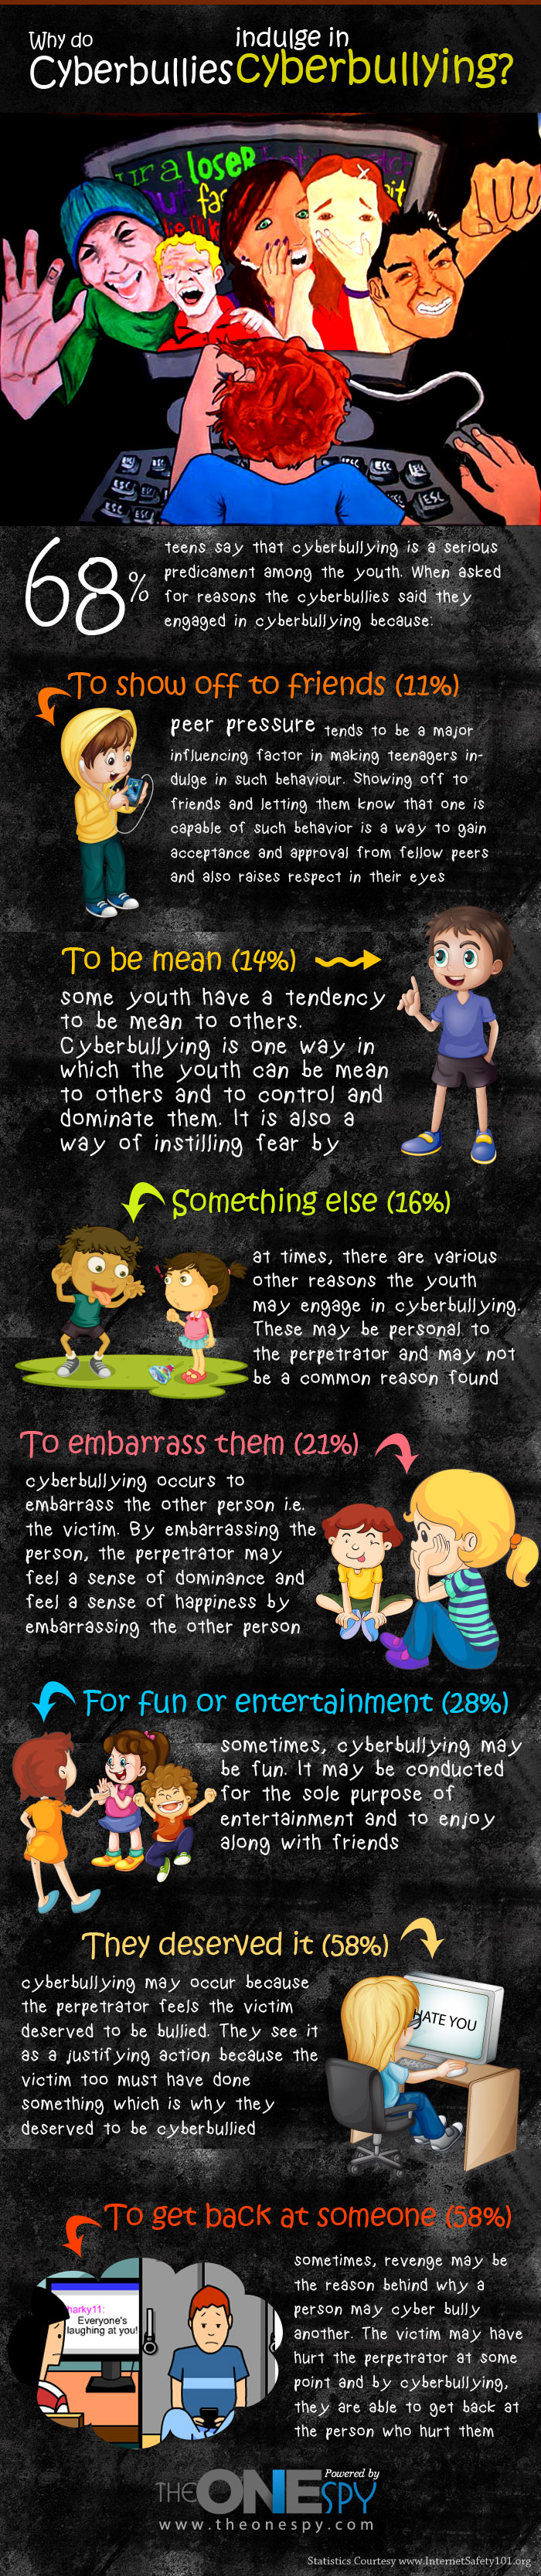 Cyber bullying is a type of bullying which is very much prevalent amongst the youth today and something about which teens are aware. When the youth were asked regarding the reasons behind cyber bullying, the most common ones included doing it to get back at someone or because believed that the victim deserved it.